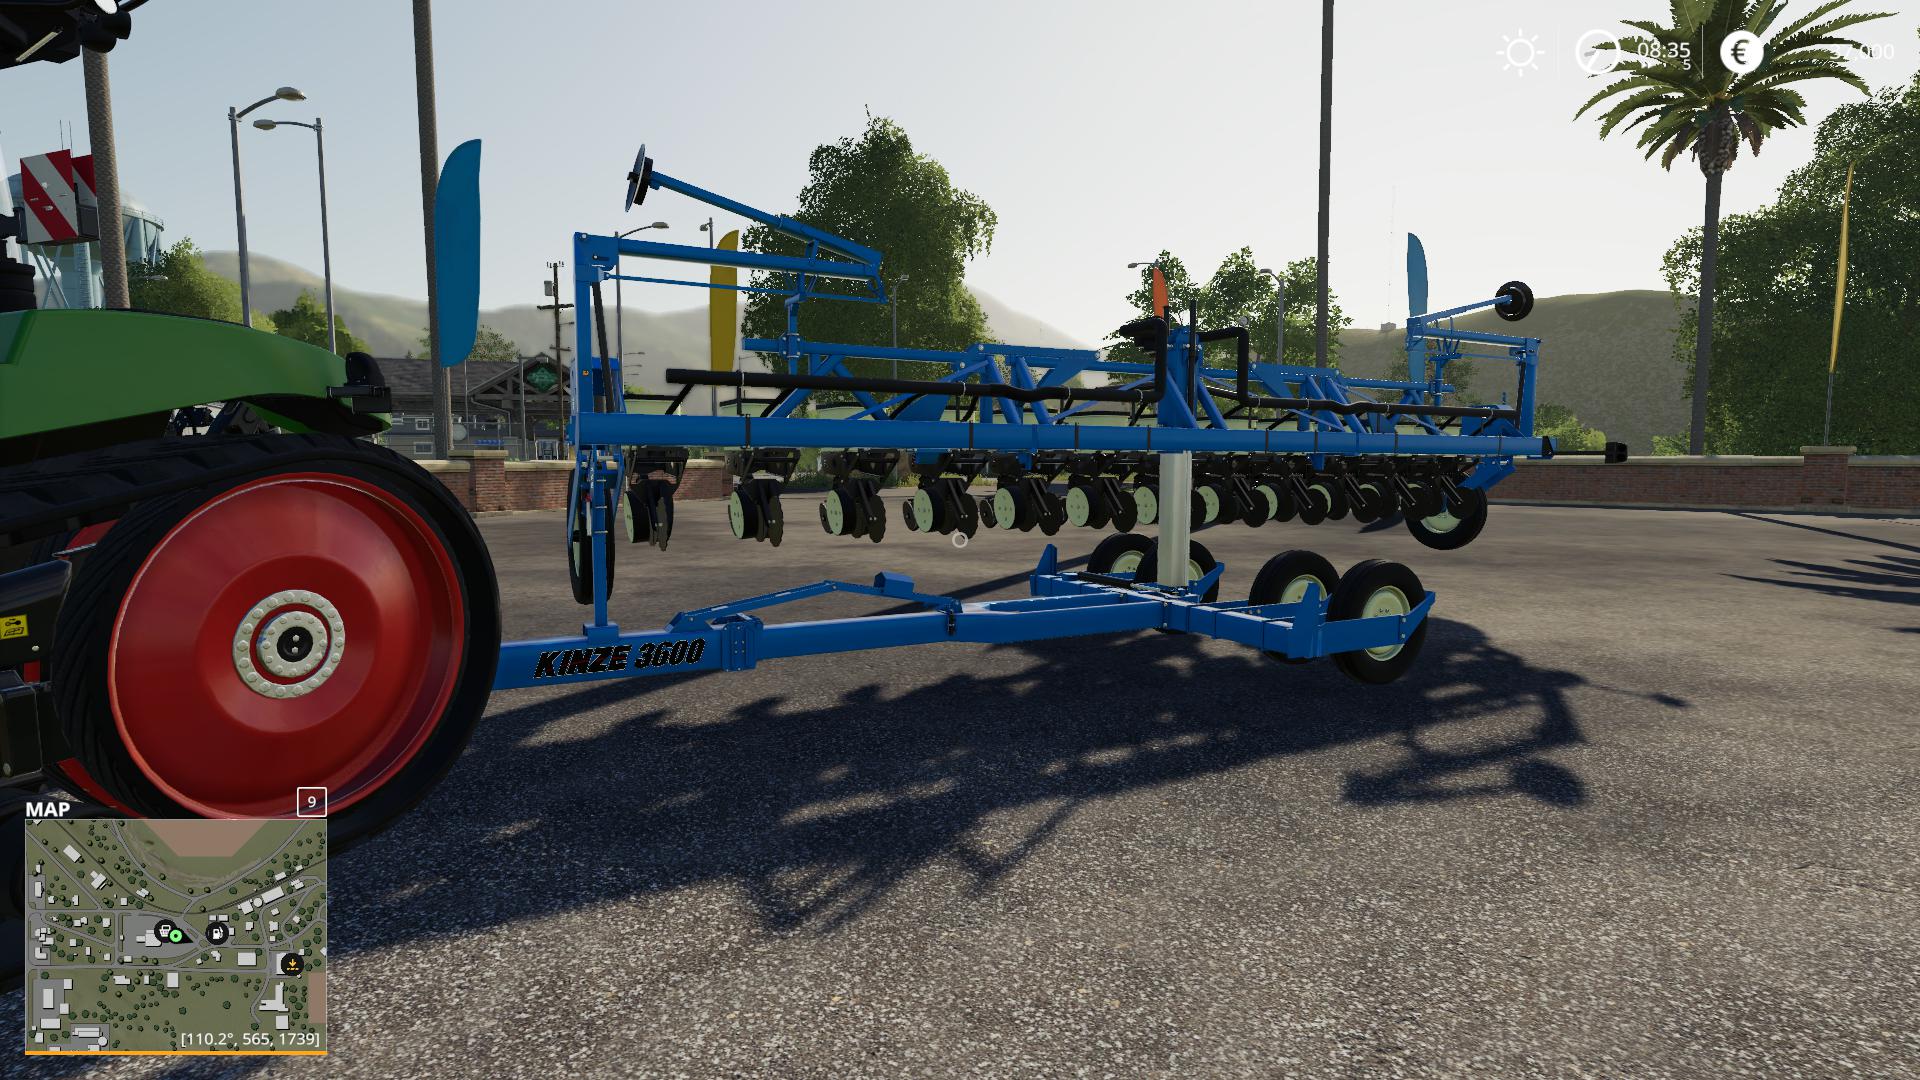 Kinze 3600 12 Row Planter has several options for seedboxes. 